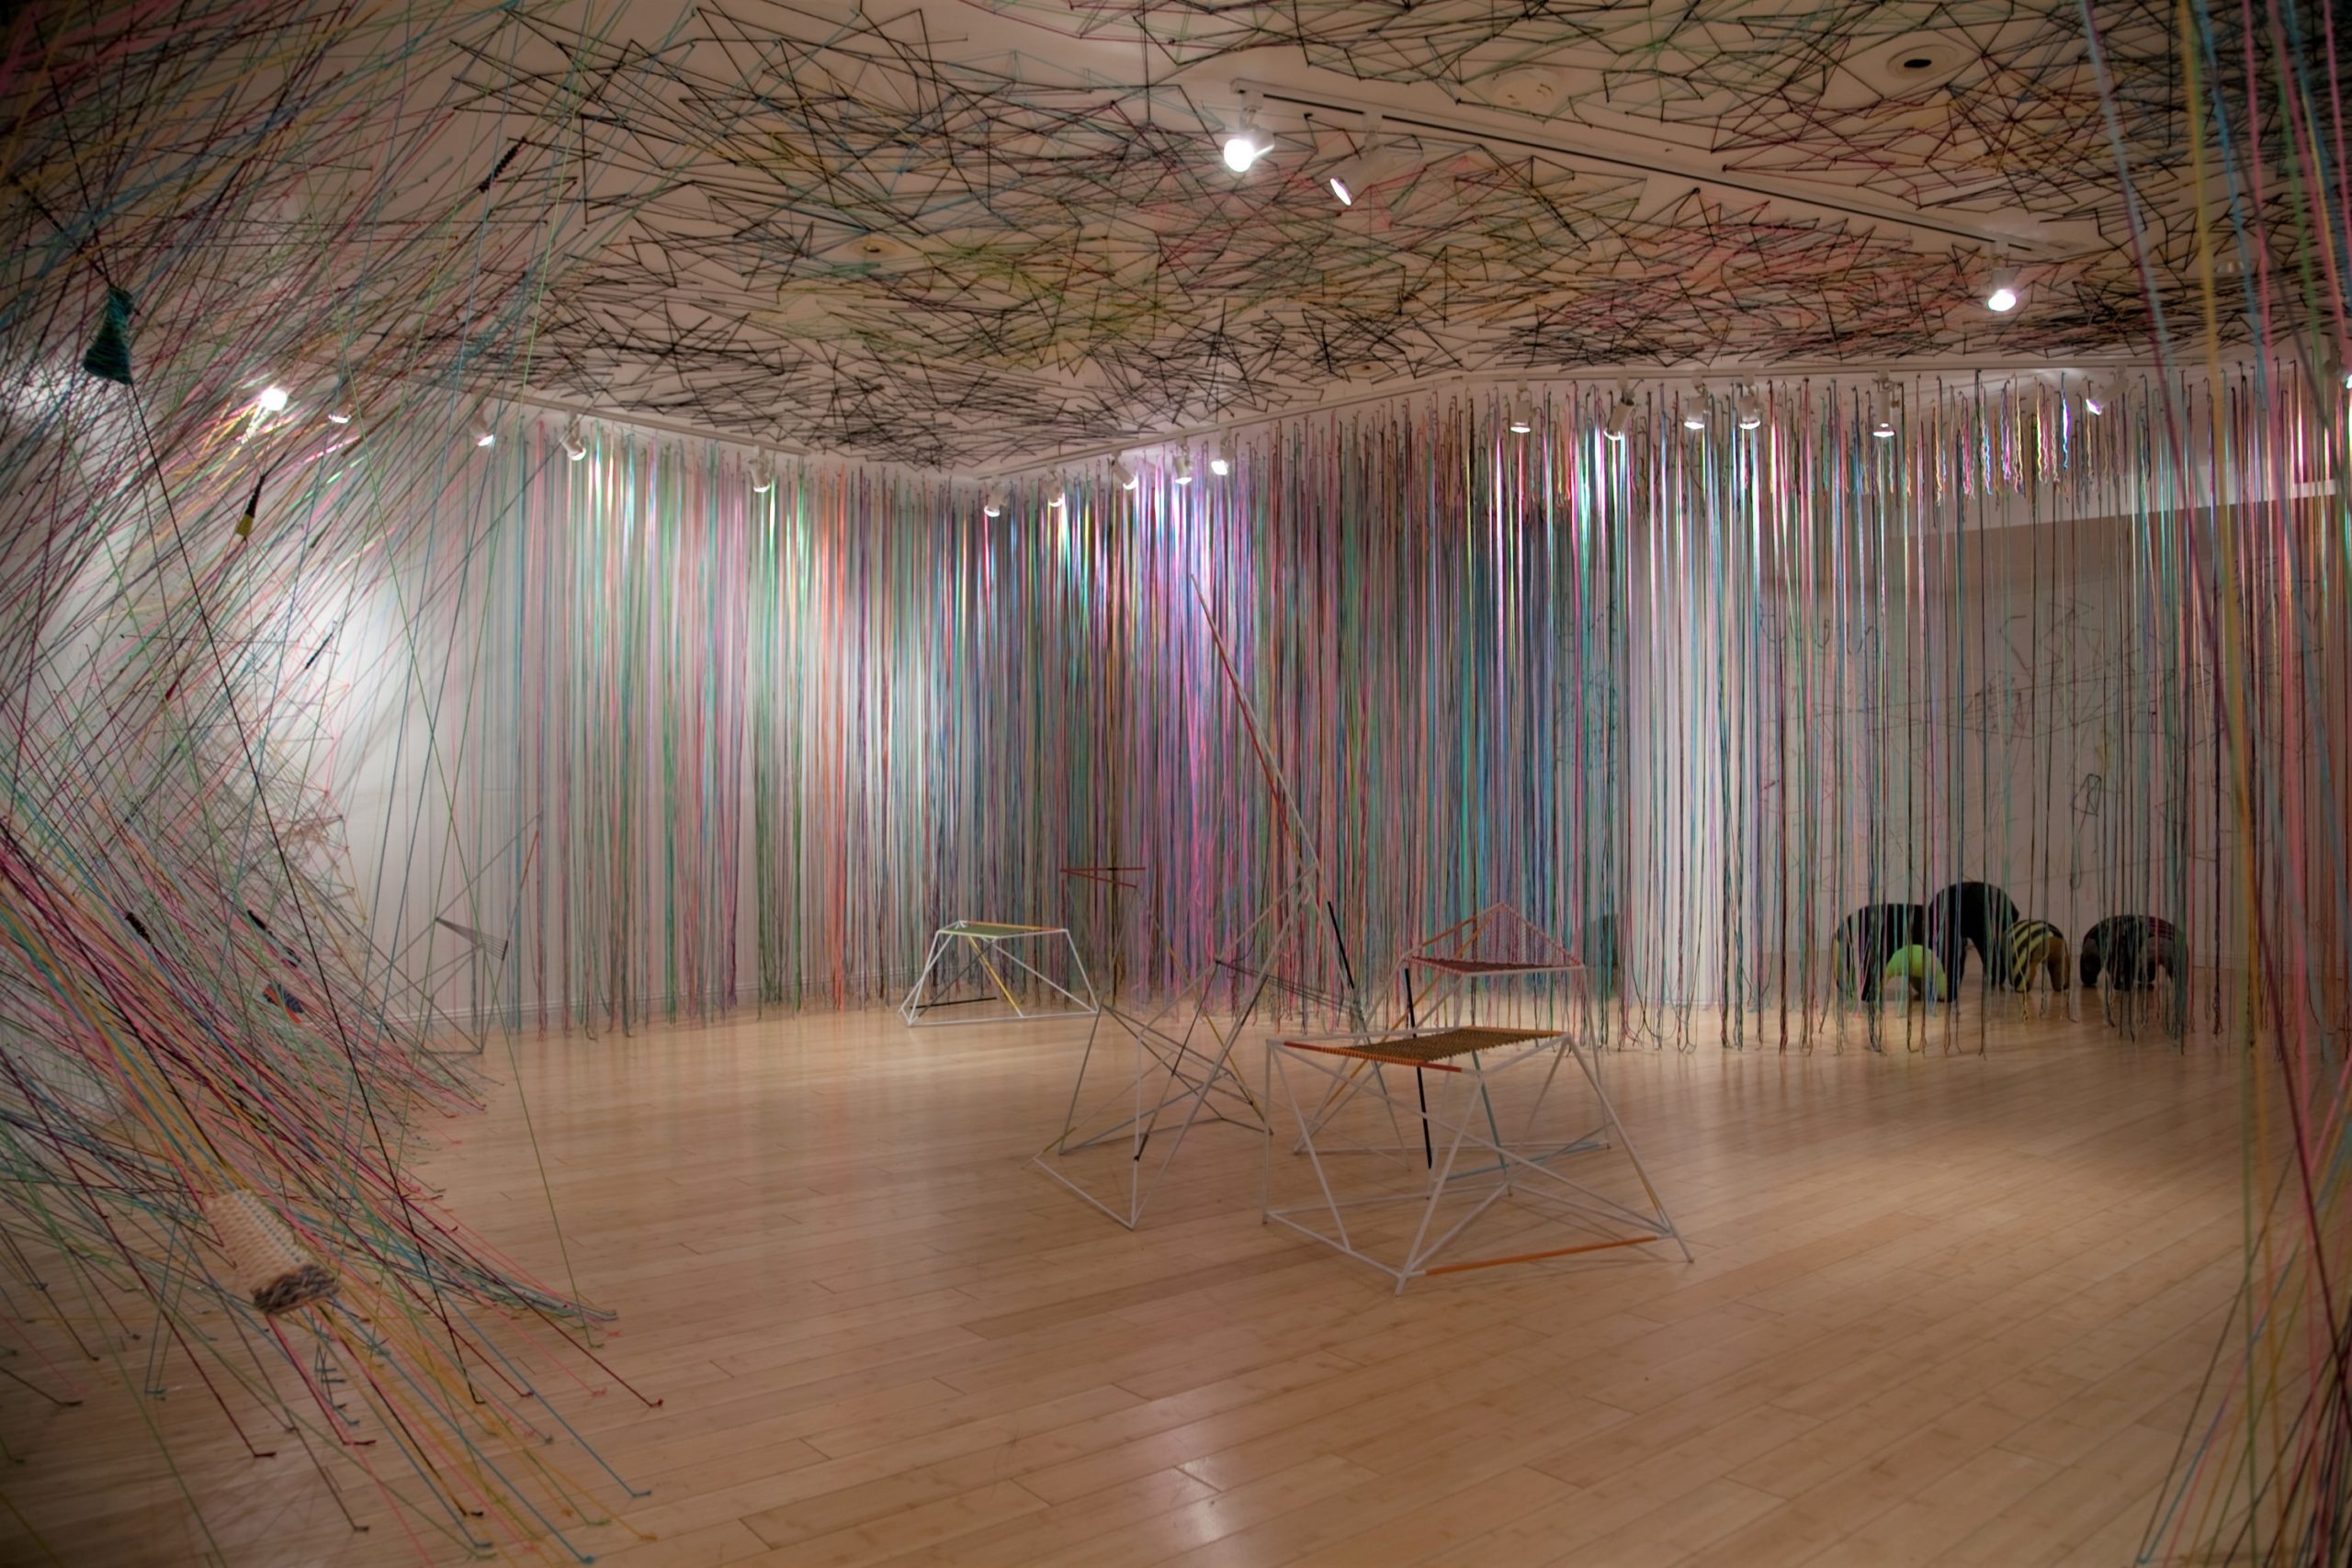 Crossing the Line: A Space by Tanya Aguiñiga, installation view, 2011.